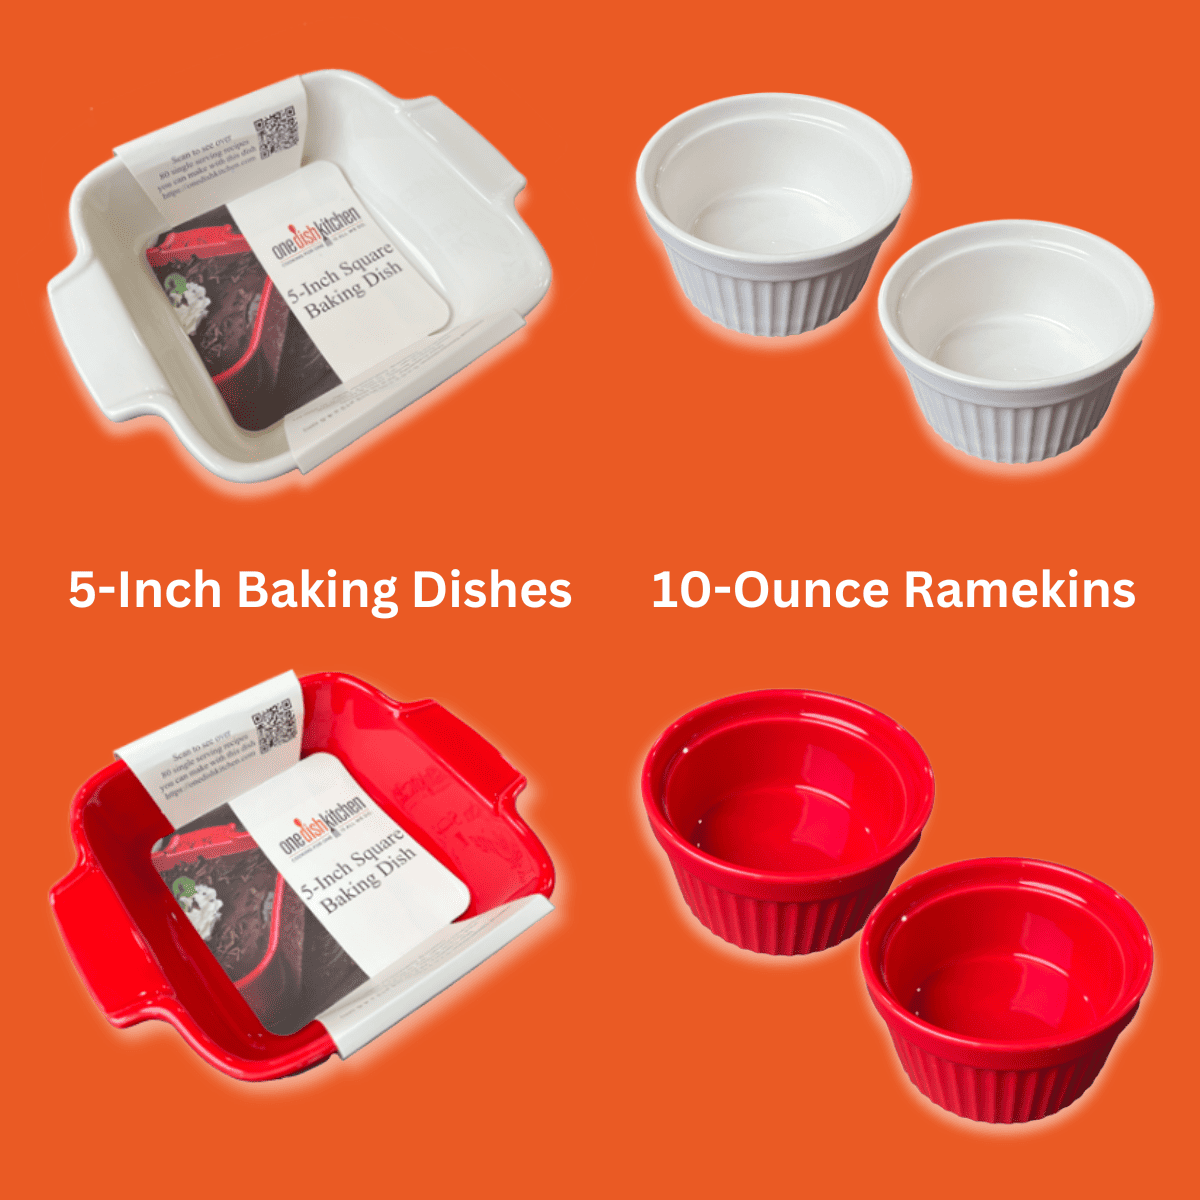 image showing one white and one red 5 inch baking dish and 2 each red and white ramekins.